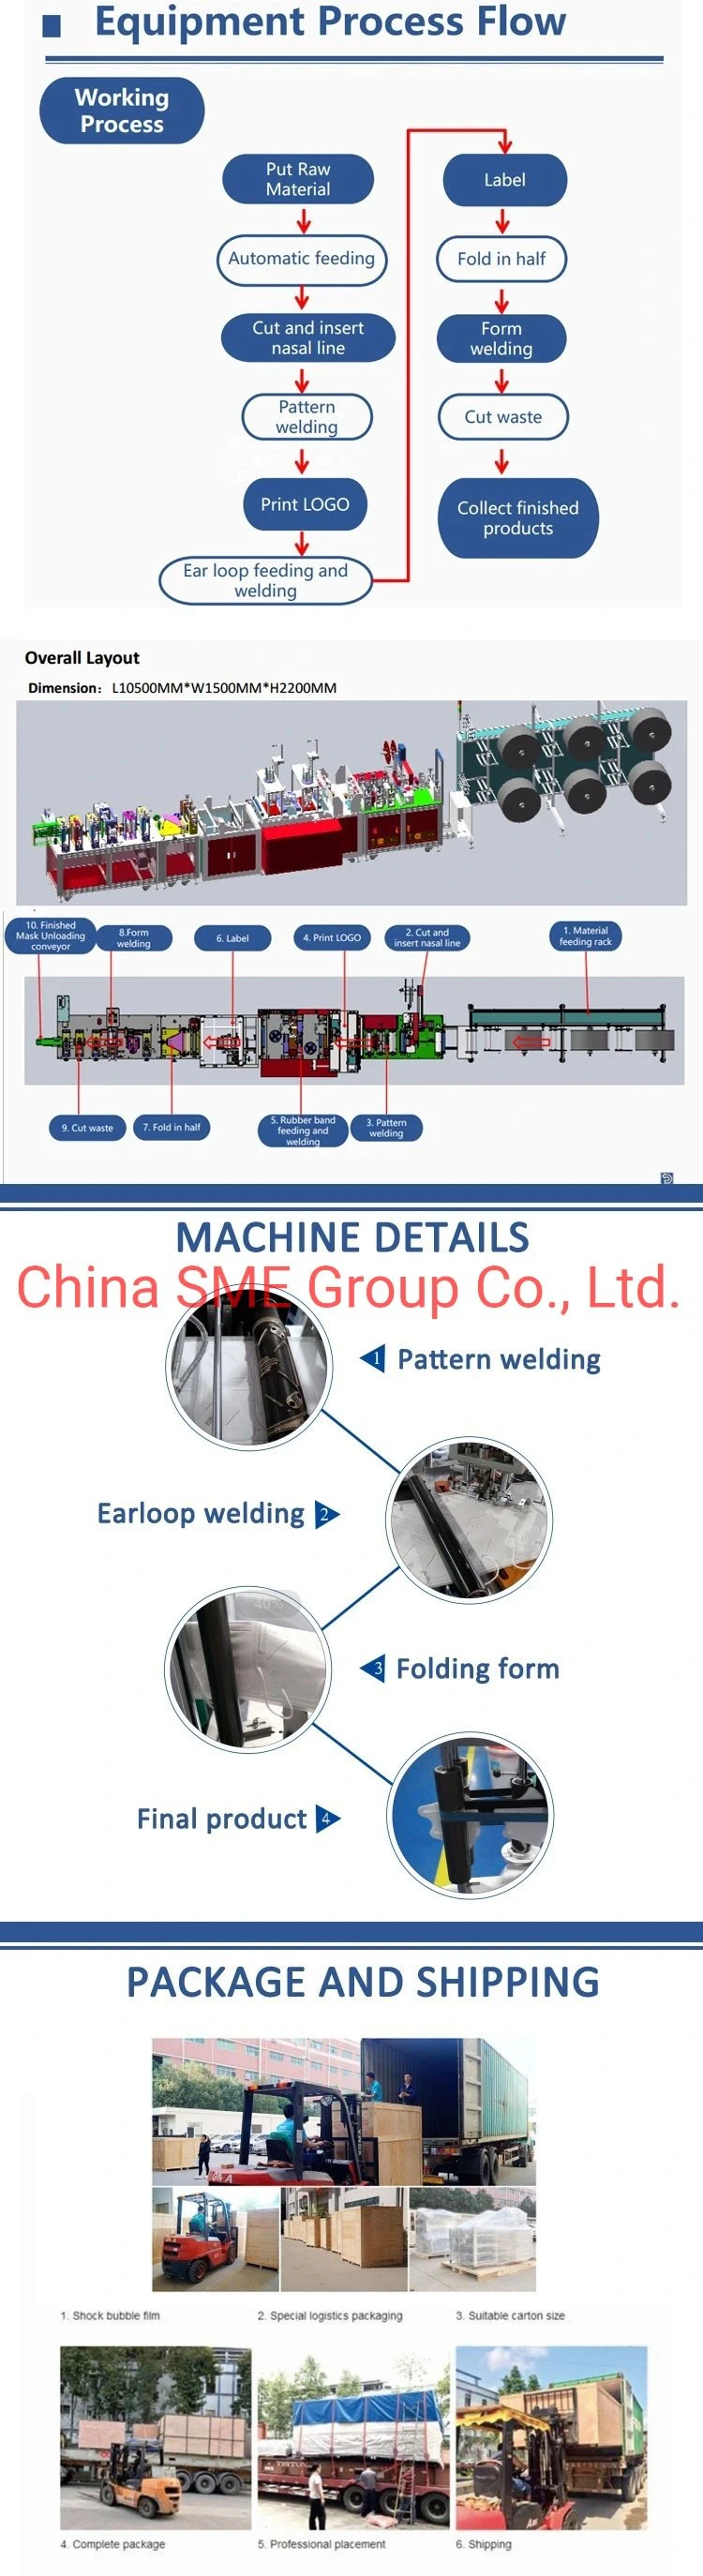 New 2020 Fully Automatic High-Speed Kn95 N95 Ffp2 Ffp3 Mask Forming Making Machine